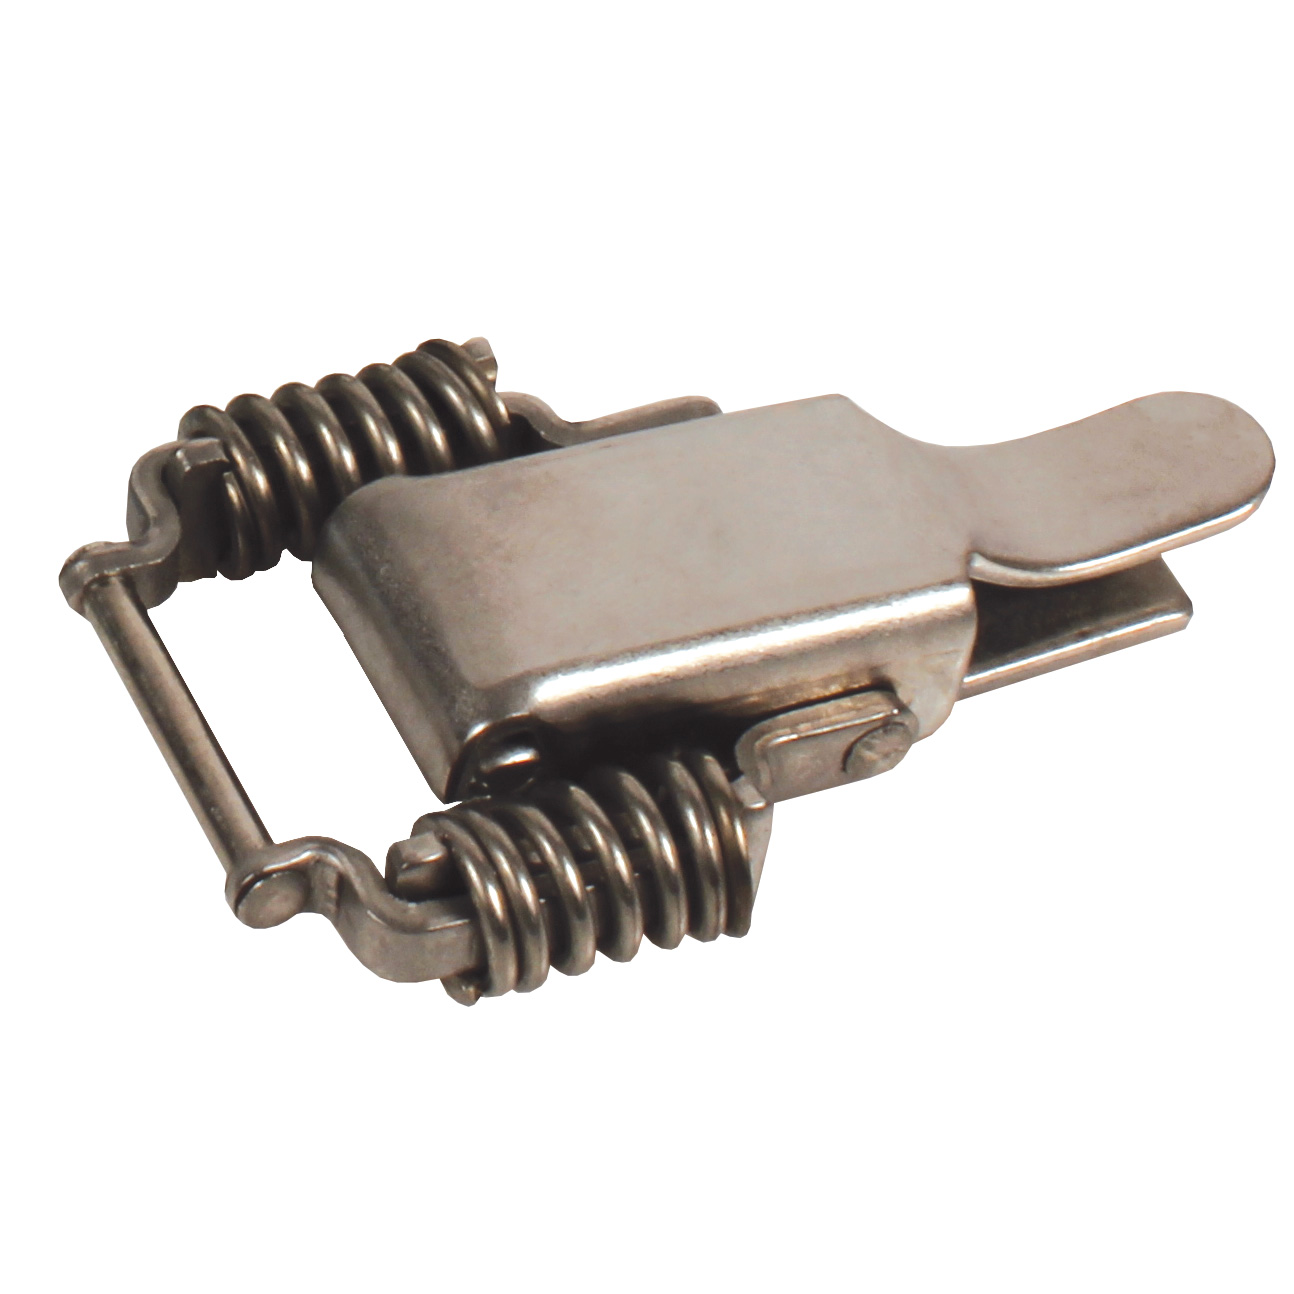 Spring loaded toggle latch - Standard  (GP22-GP23) - Stainless steel - 